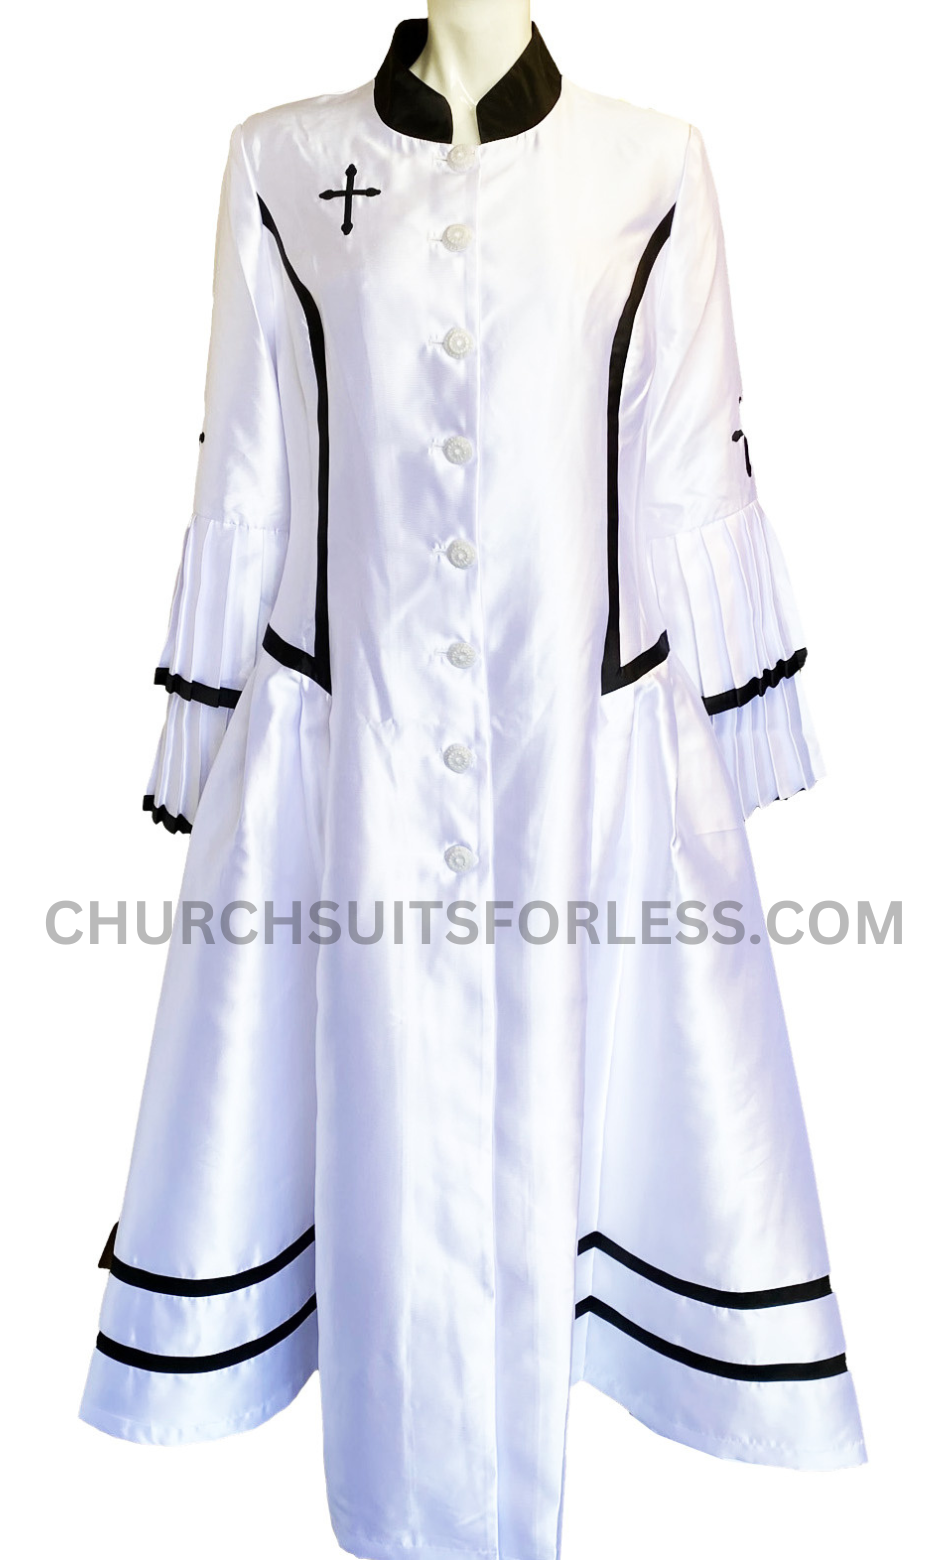 Diana Couture Church Robe 8708C-White/Black - Church Suits For Less